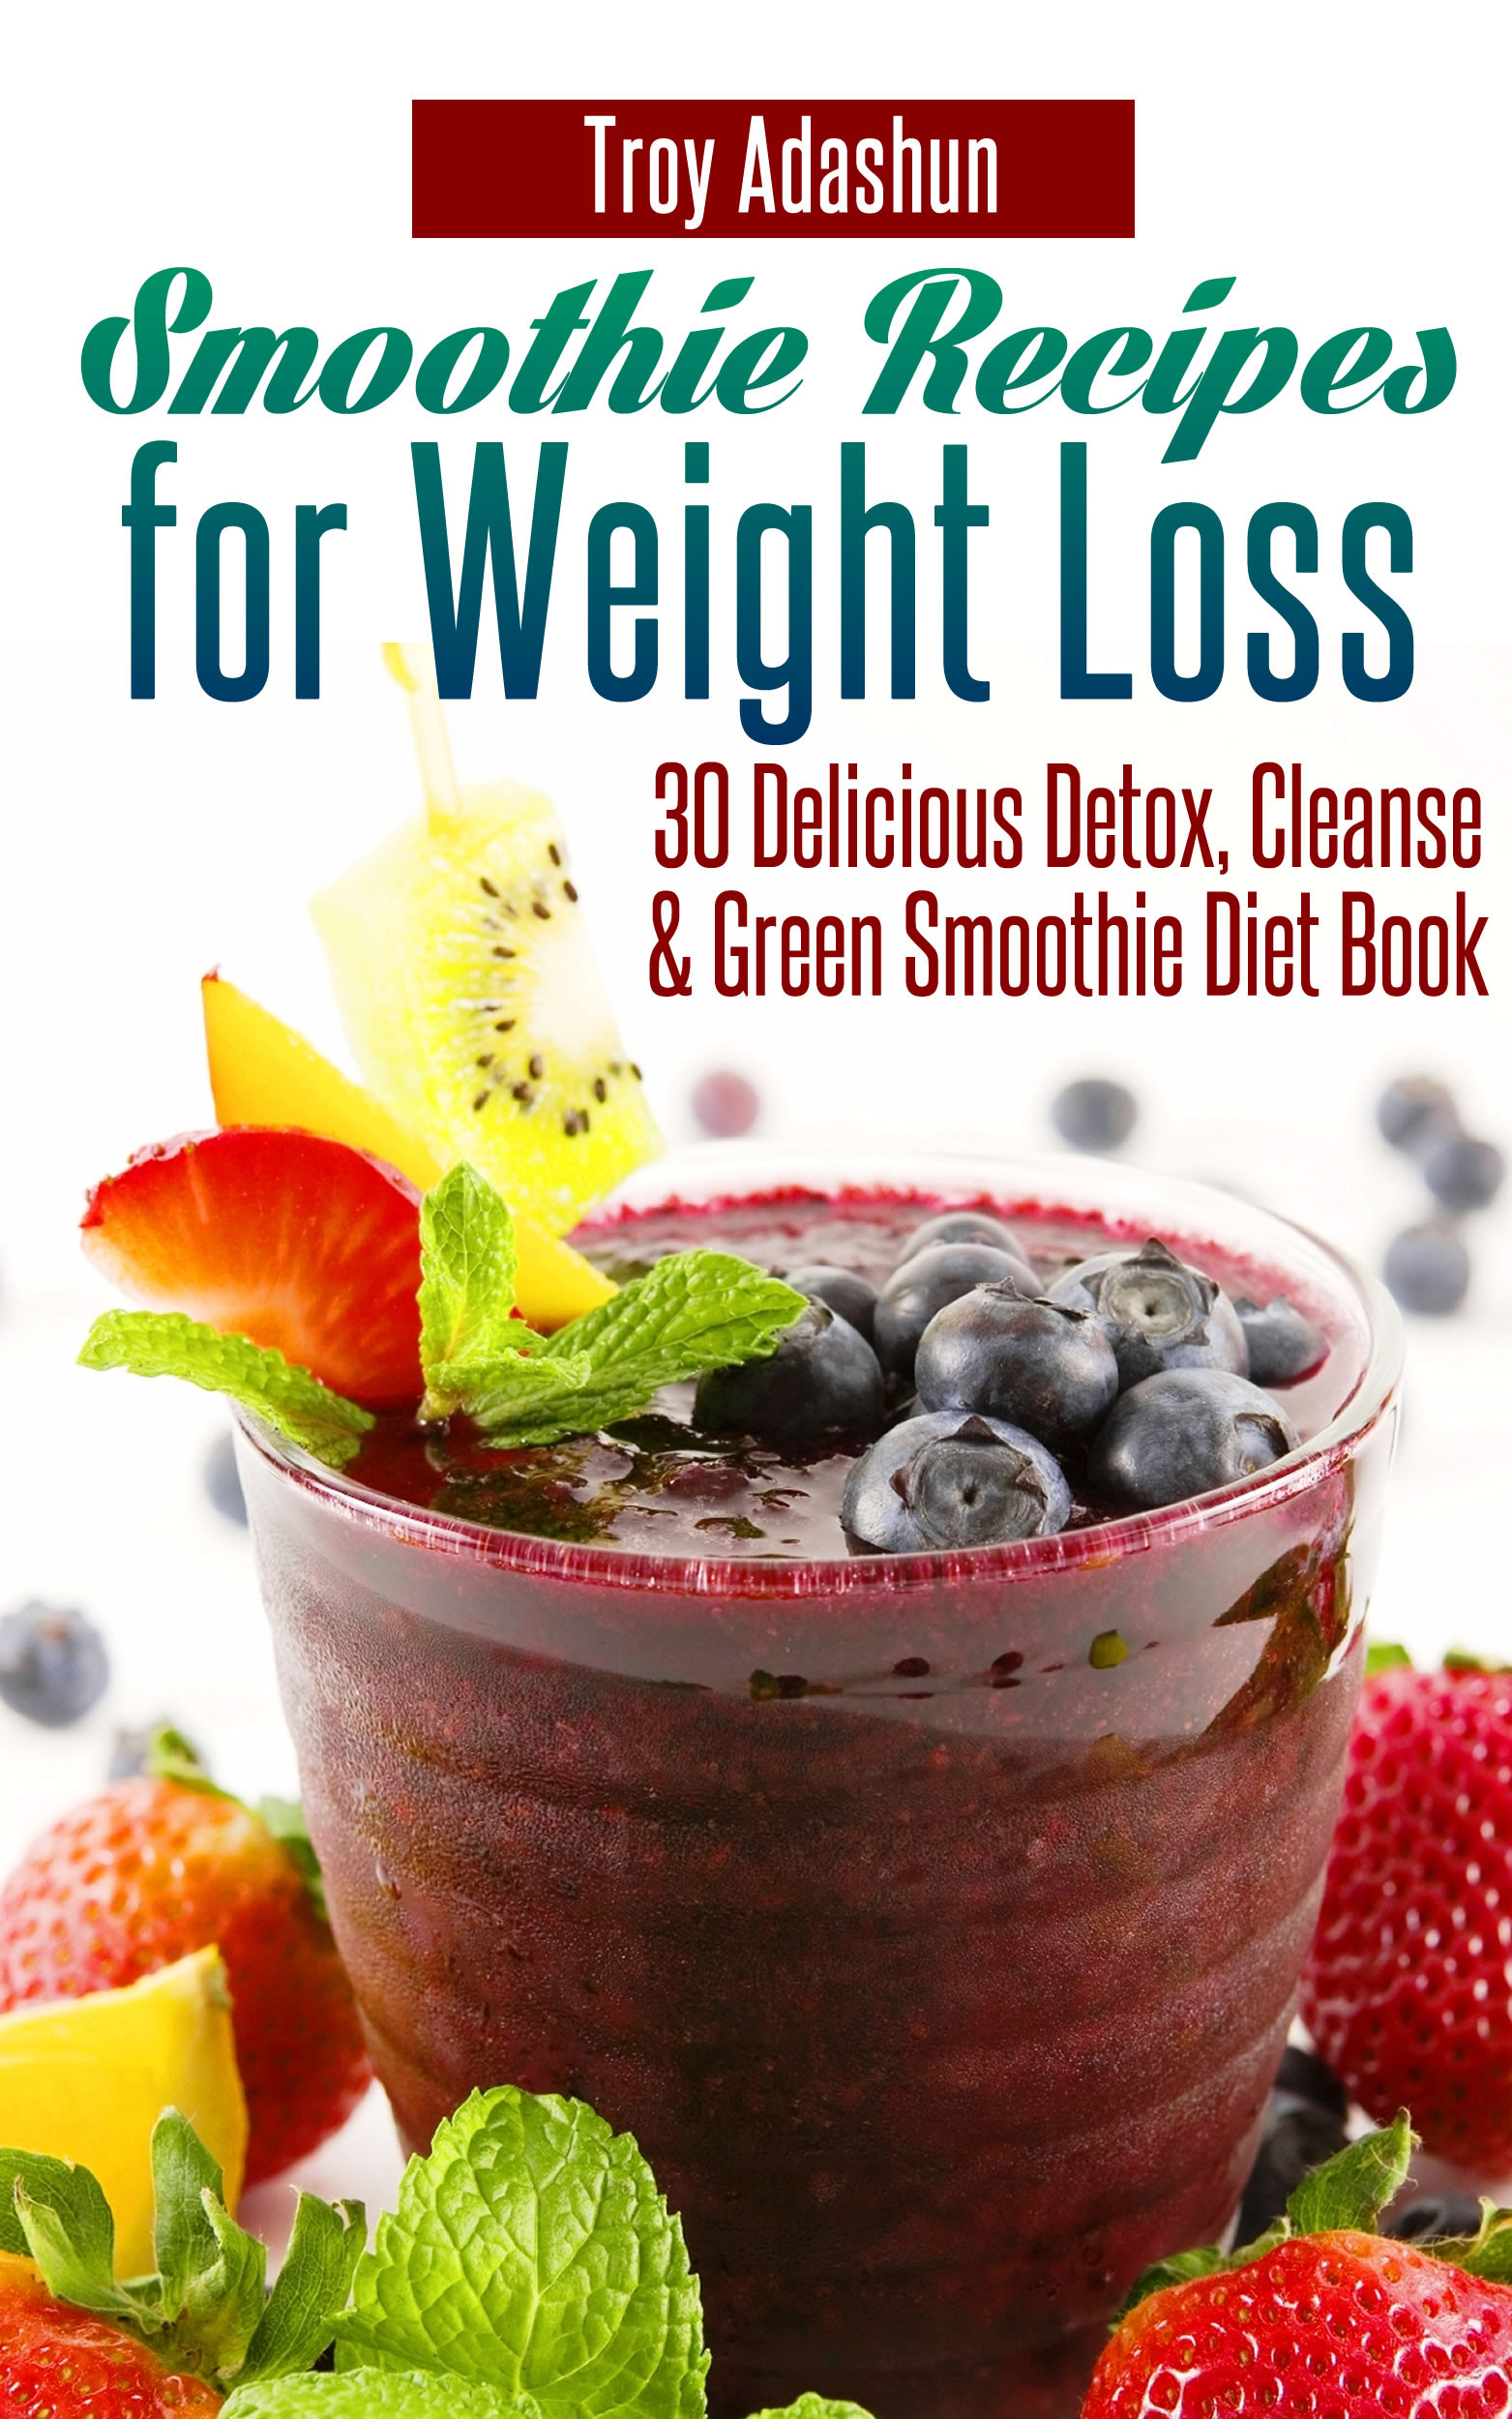 Weight Loss Smoothies Diet
 Smashwords – Smoothie Recipes for Weight Loss 30